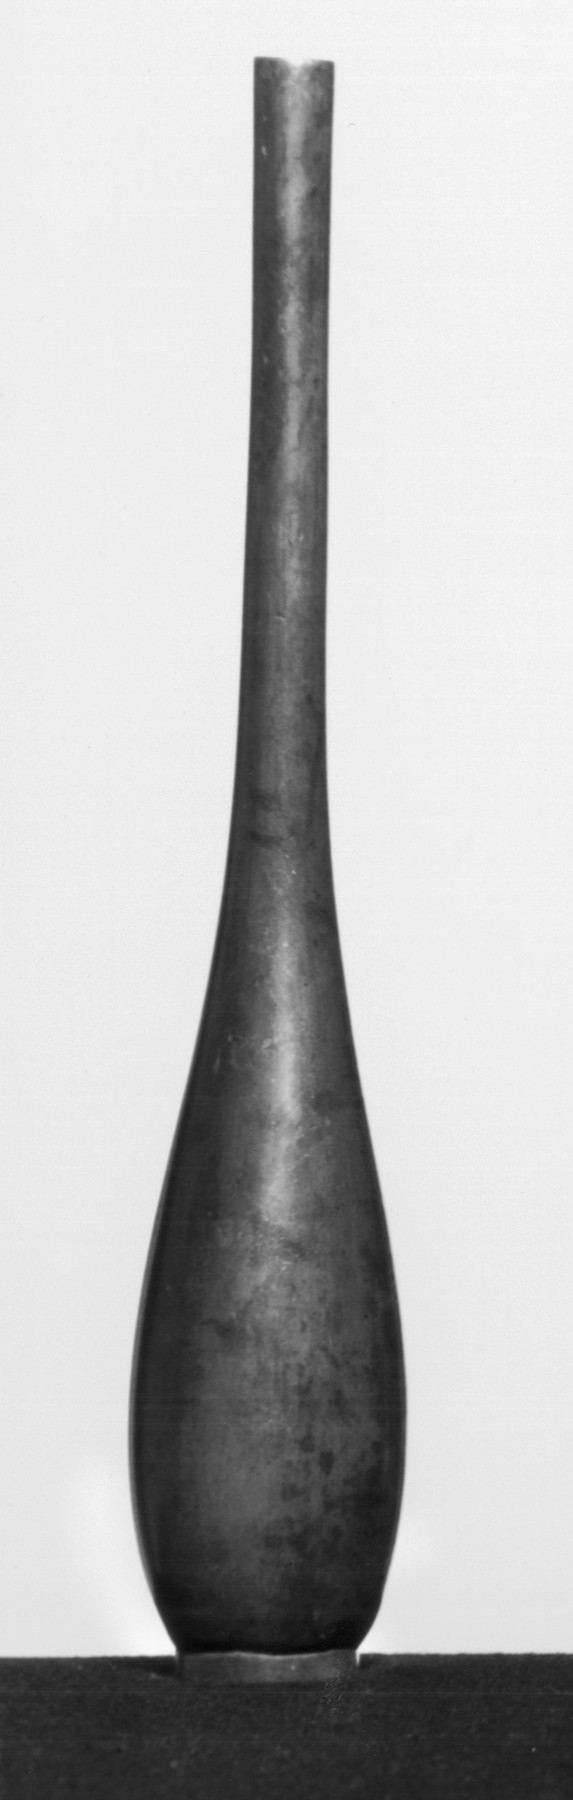 Oviform Bottle with a Long Neck